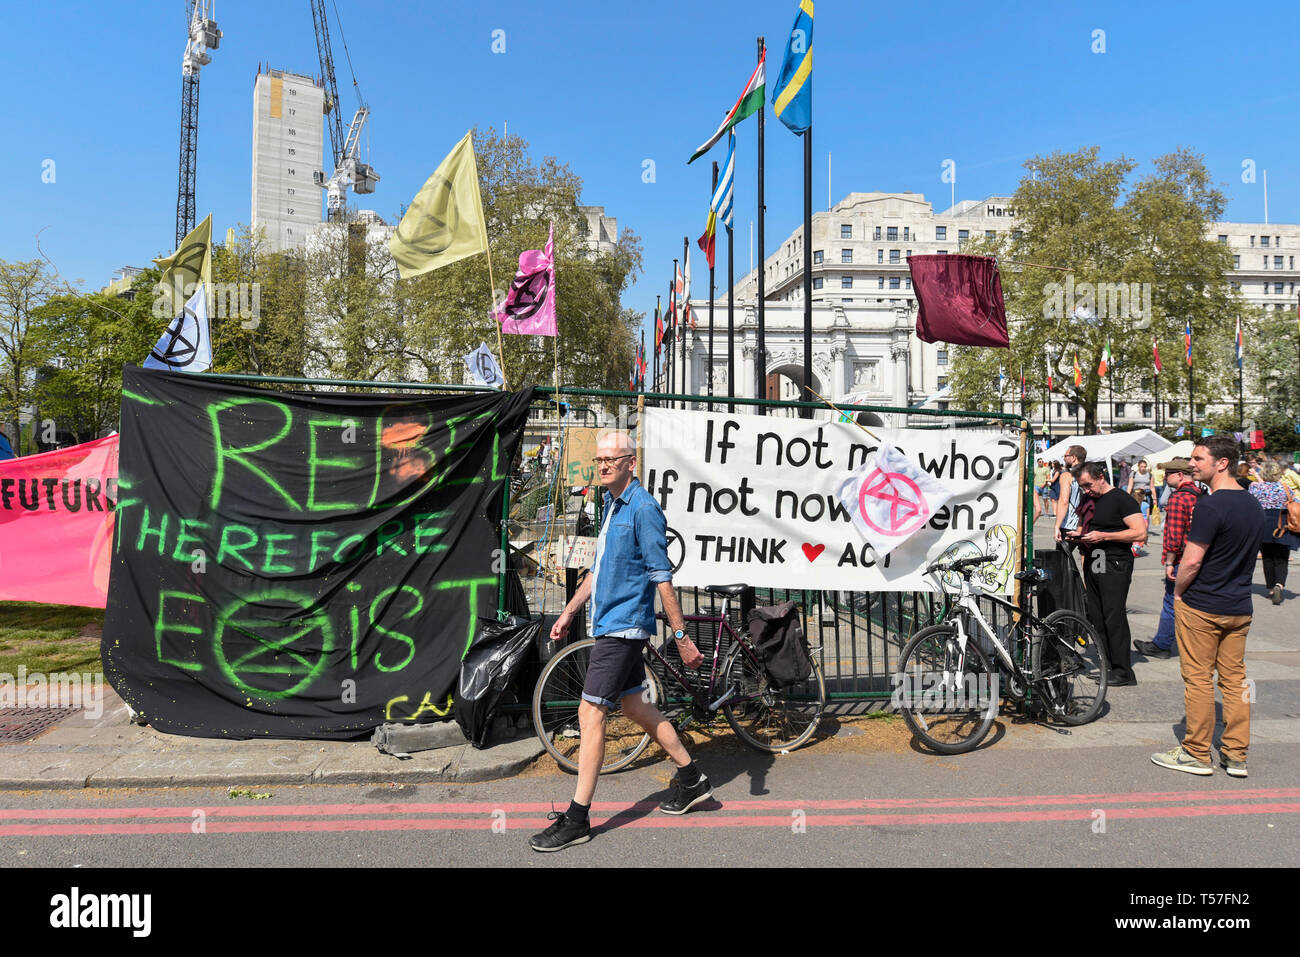 London, UK.  22 April 2019.  Activists gather at Marble Arch during 'London: International Rebellion', on day eight of a protest organised by Extinction Rebellion.  Protesters are demanding that governments take action against climate change.  After police issued section 14 orders at the other protest sites of Oxford Circus, Waterloo Bridge and Parliament Square resulting in over 900 arrests, protesters have convened at the designated site of Marble Arch so that the protest can continue into its second week.  Credit: Stephen Chung / Alamy Live News Stock Photo